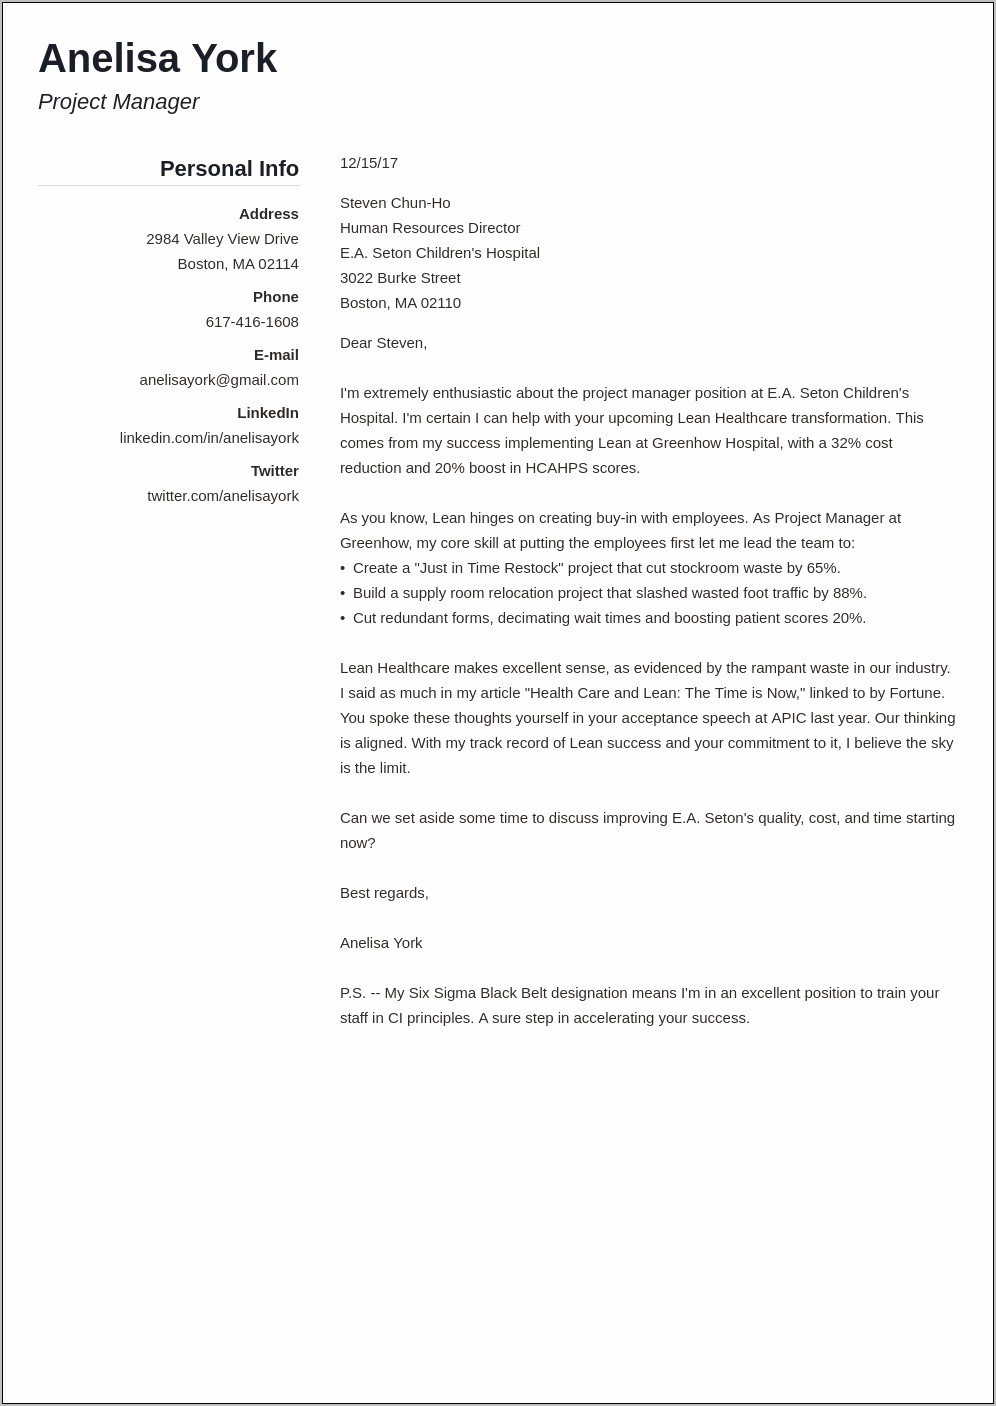 attach cover letter and resume